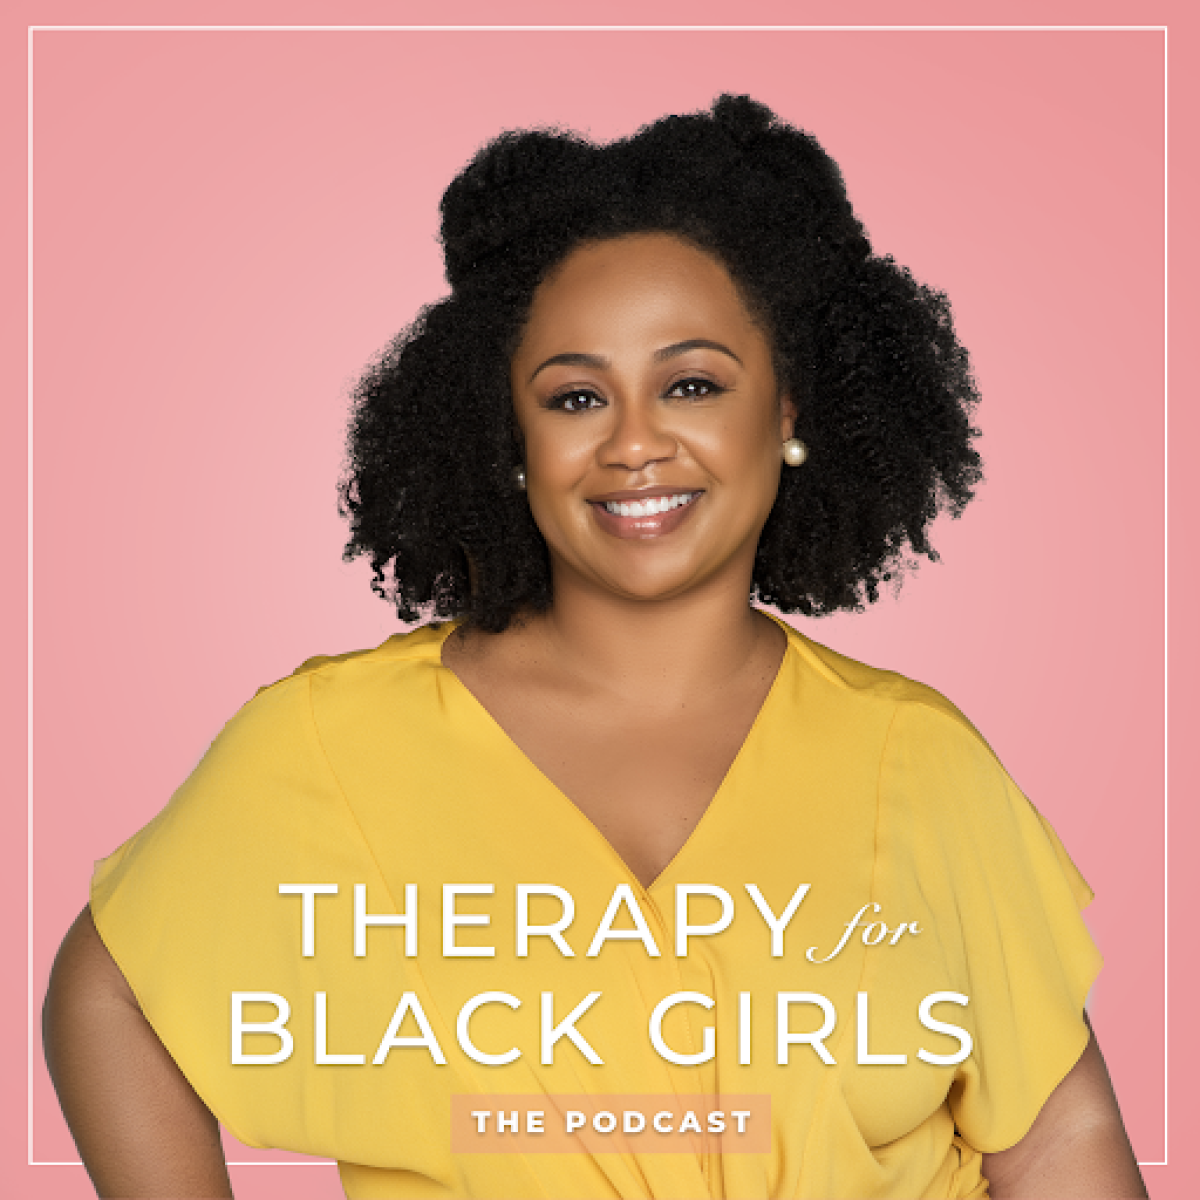 "Therapy for Black Girls" is a podcast created by Dr. Joy Harden Bradford